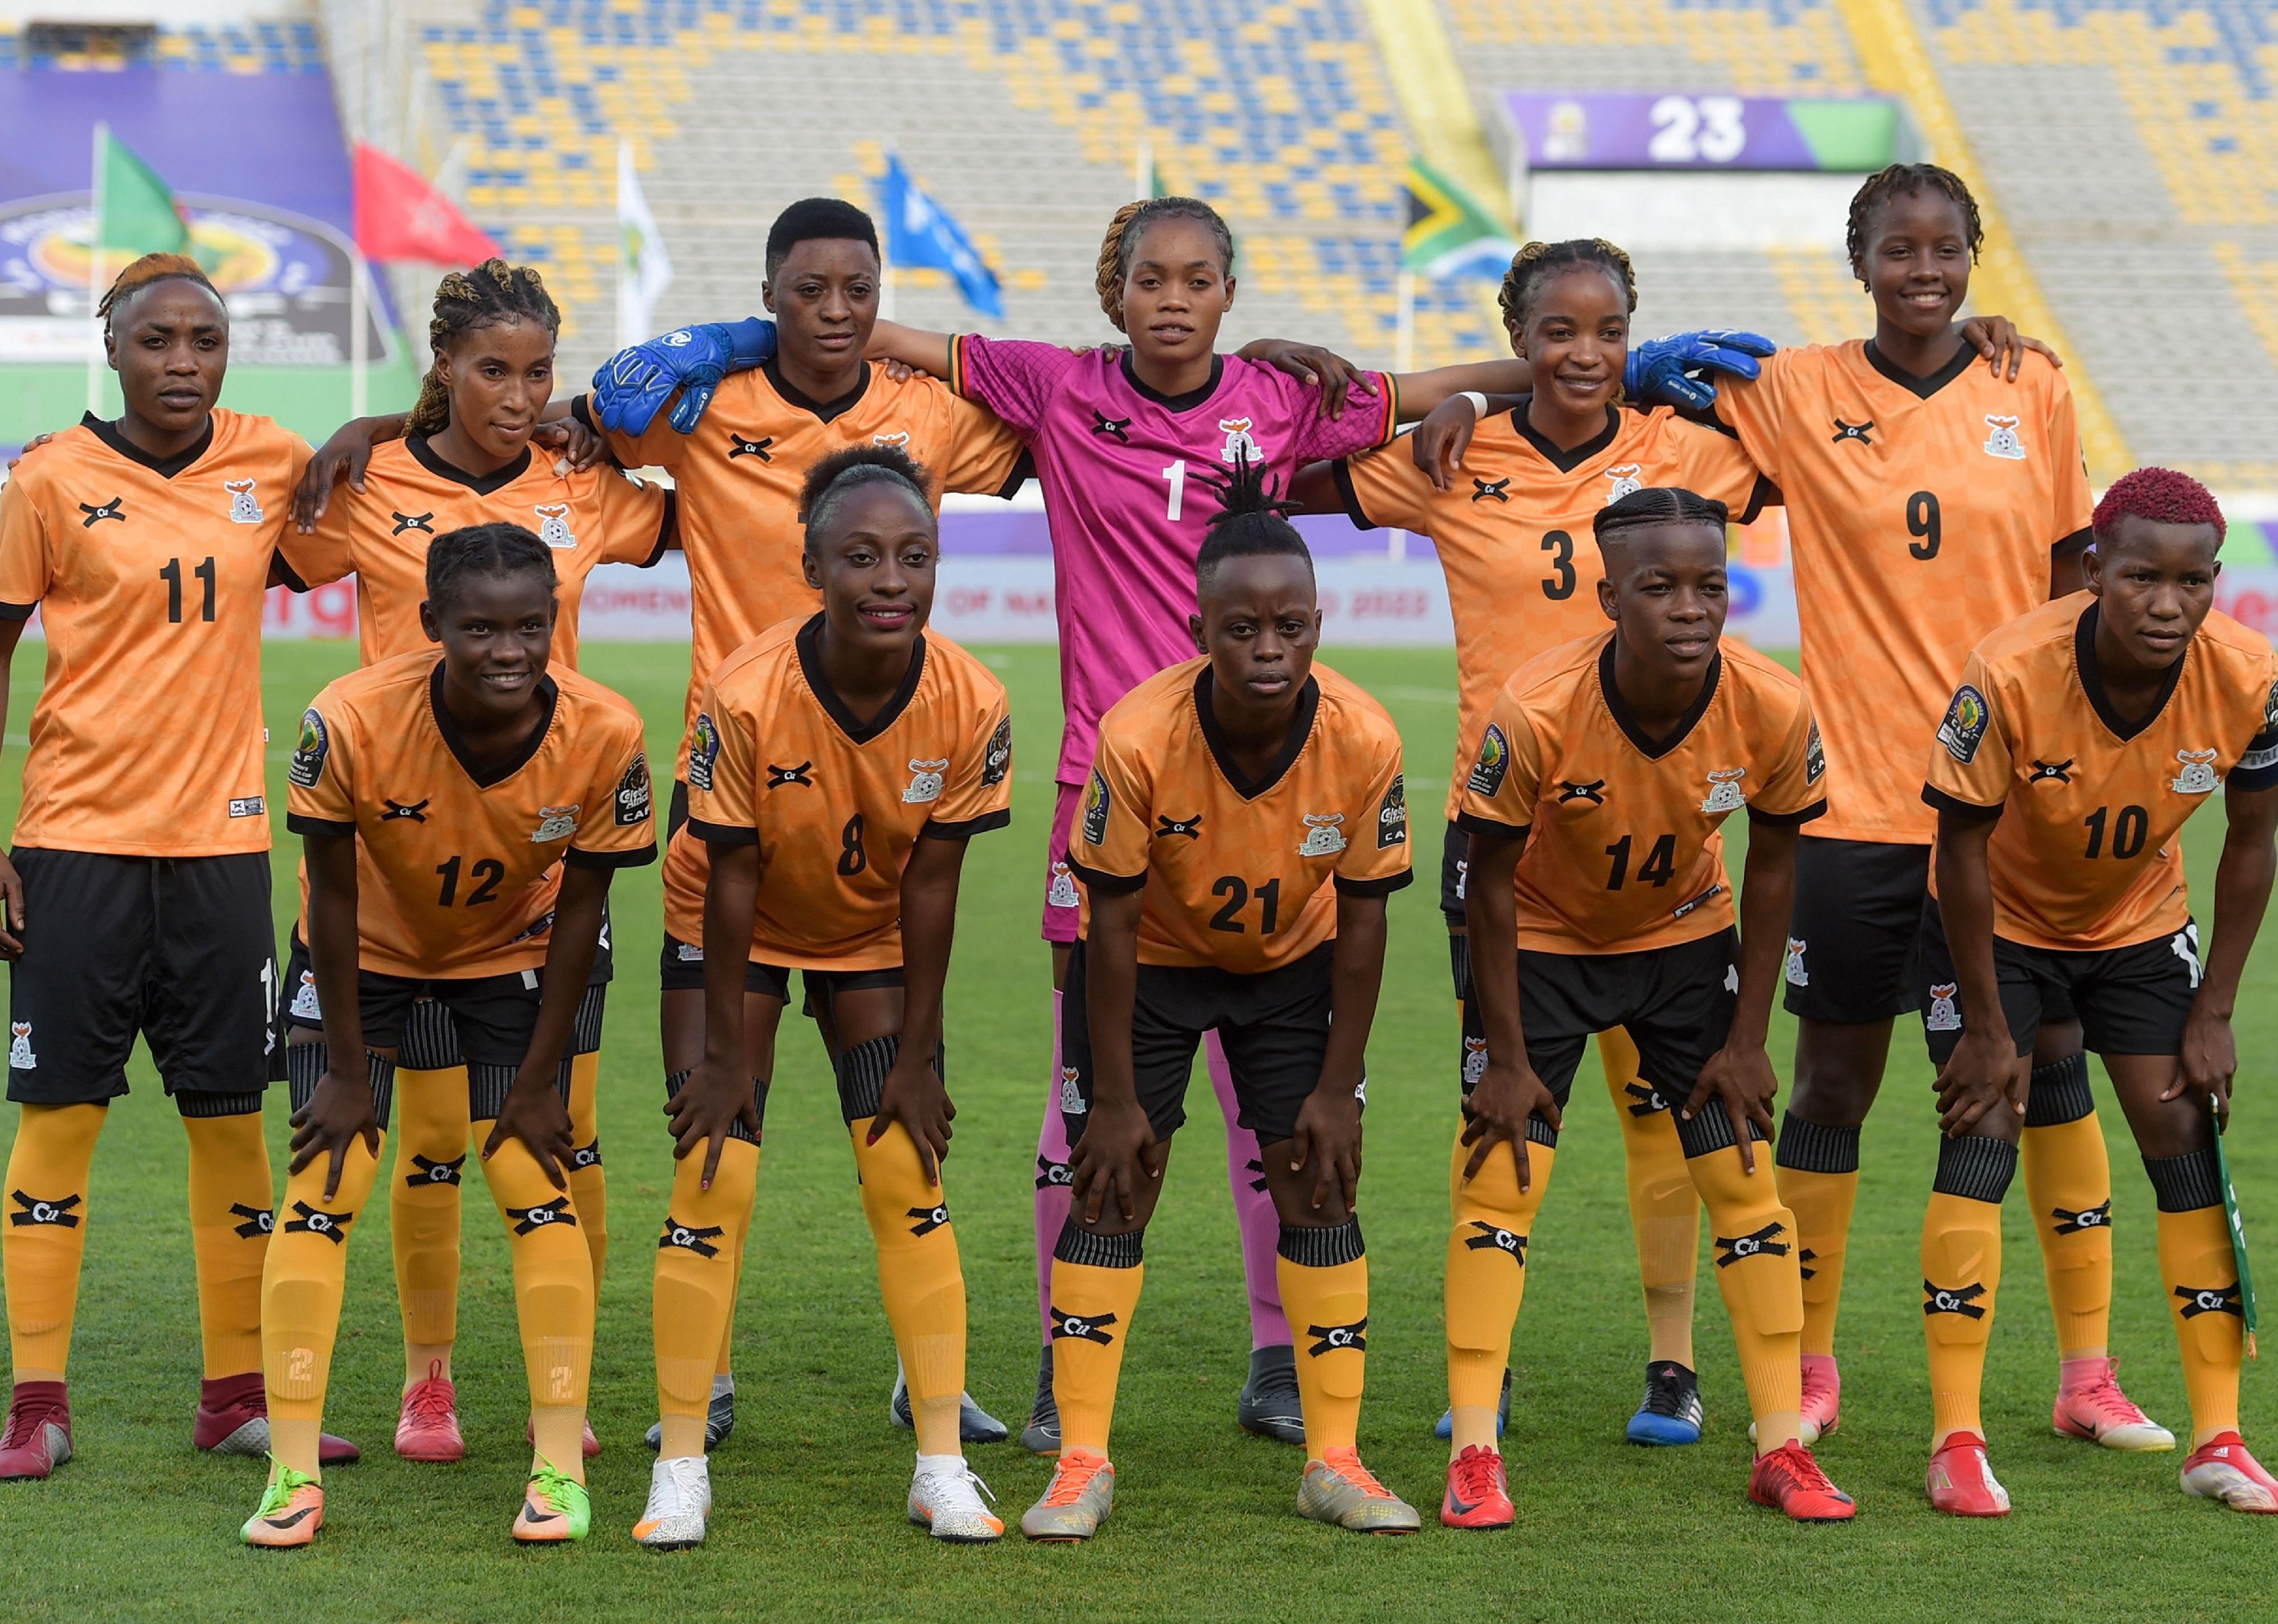 Zambia's starting 11 pose for a group picture during the 2022 Women's Africa Cup of Nations semifinal football match.